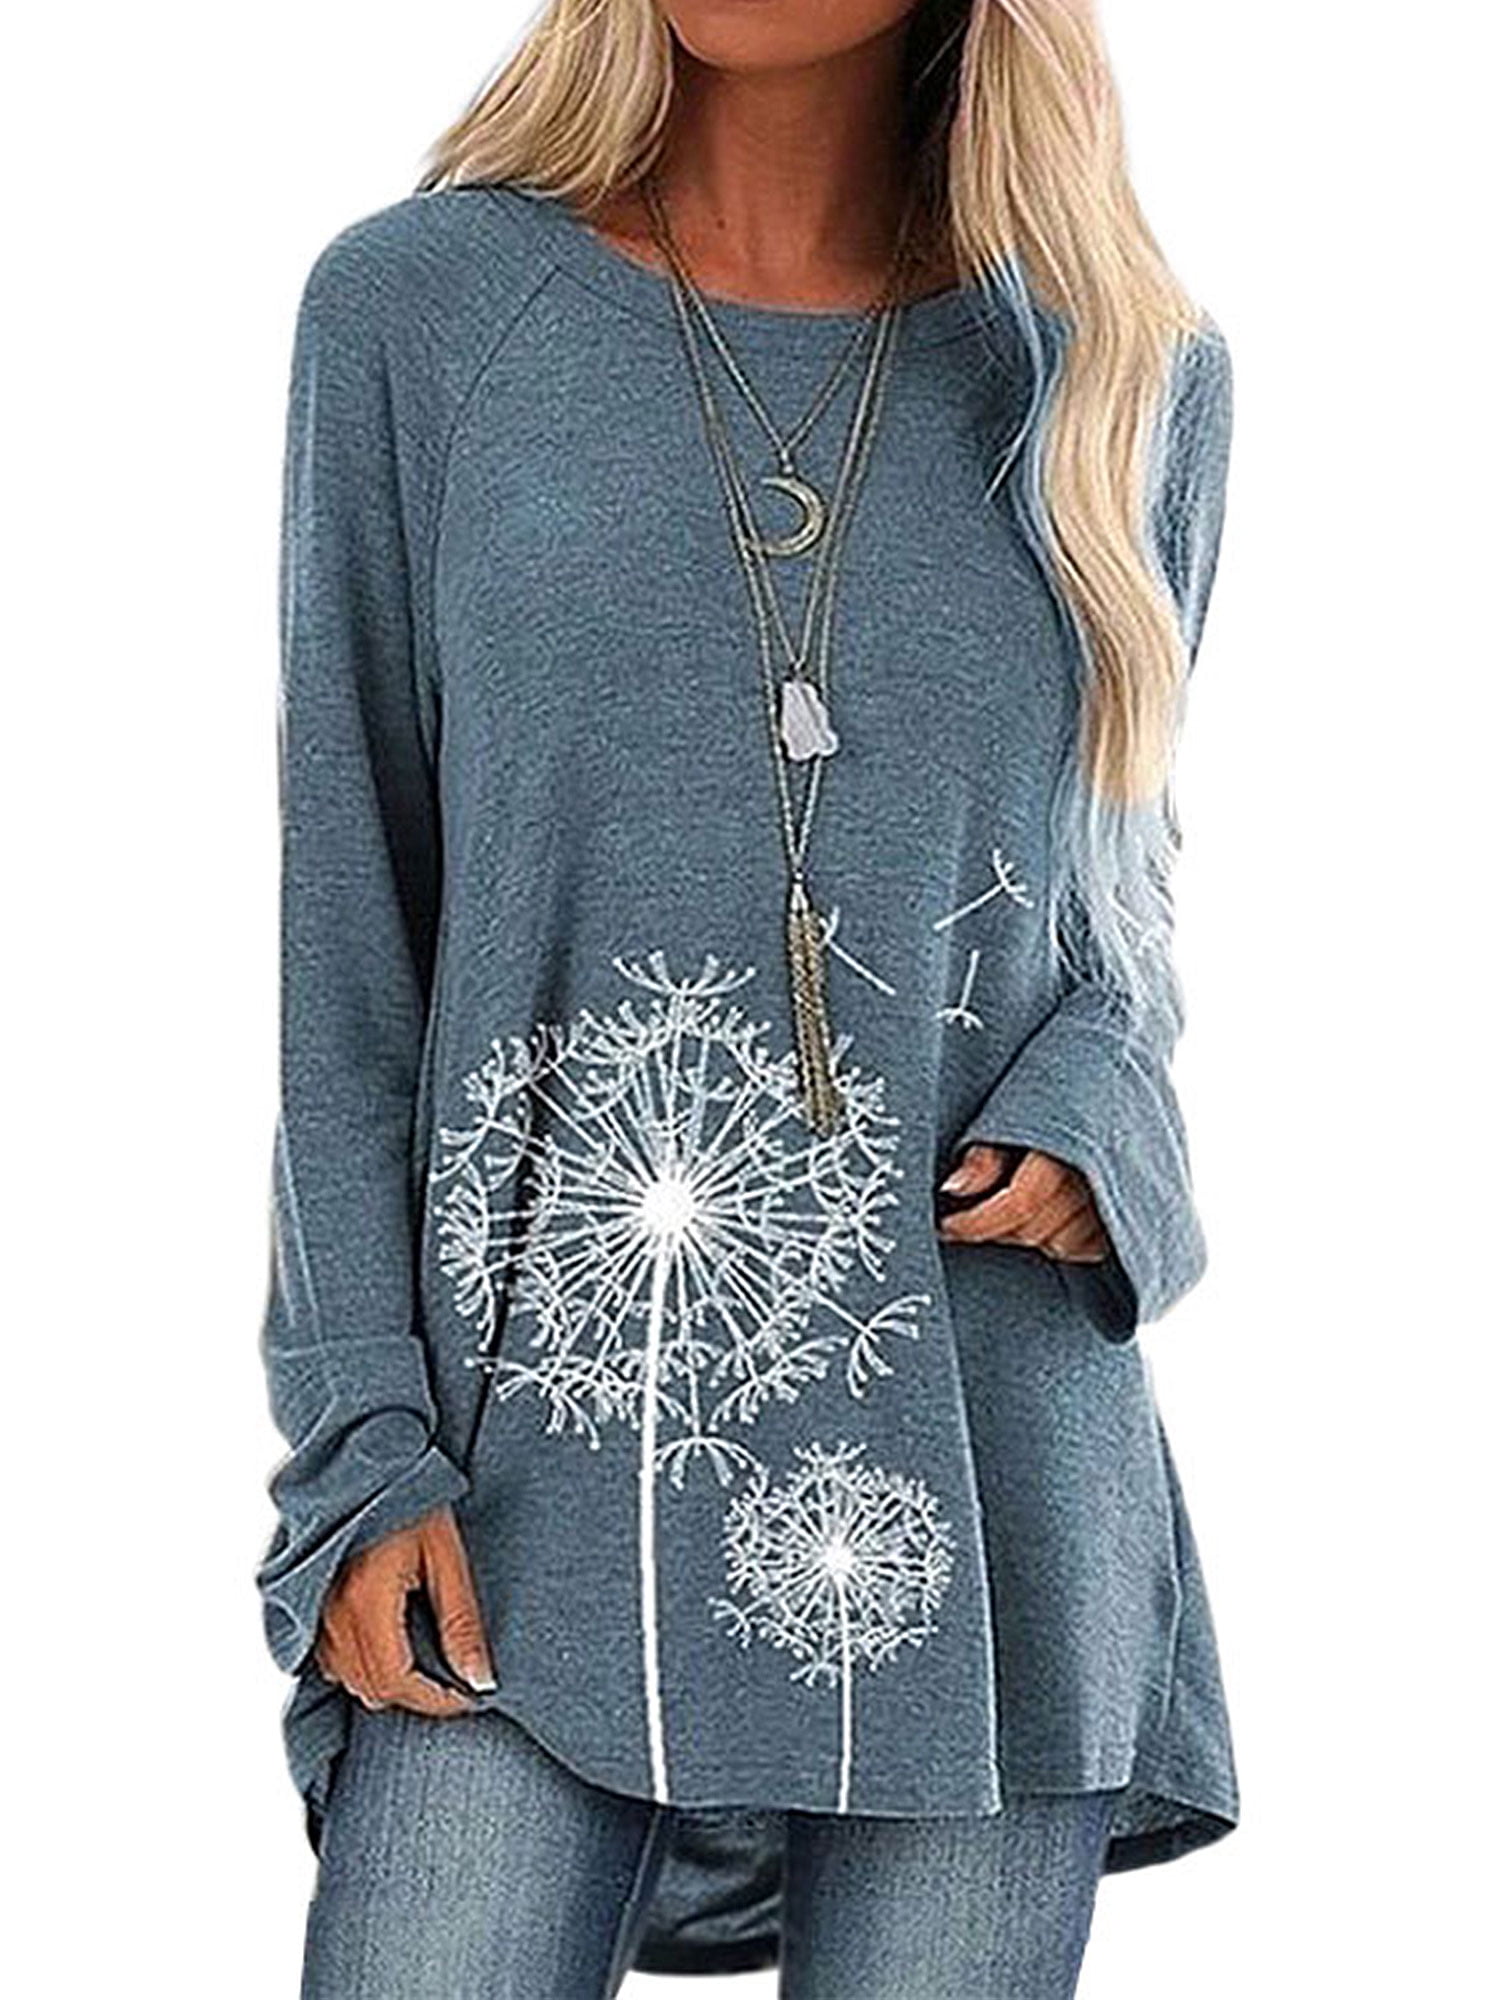 Plus Size Women's Long Sleeve T Shirt Blouse Loose Casual Tunic Pullover Tee Top 